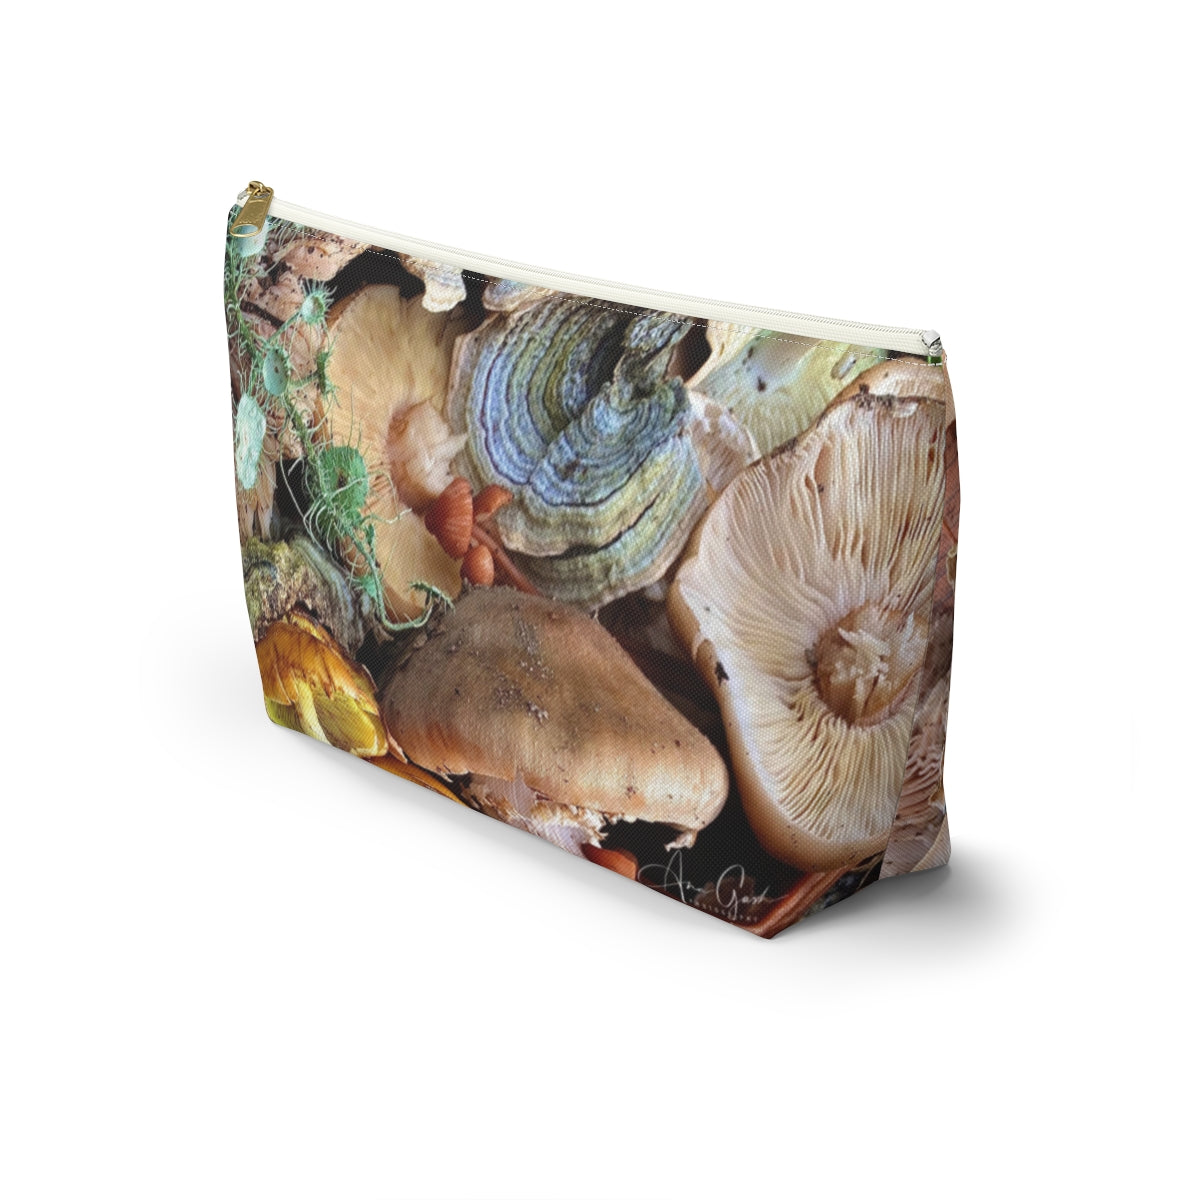 Forest Treasures - Accessory Pouch